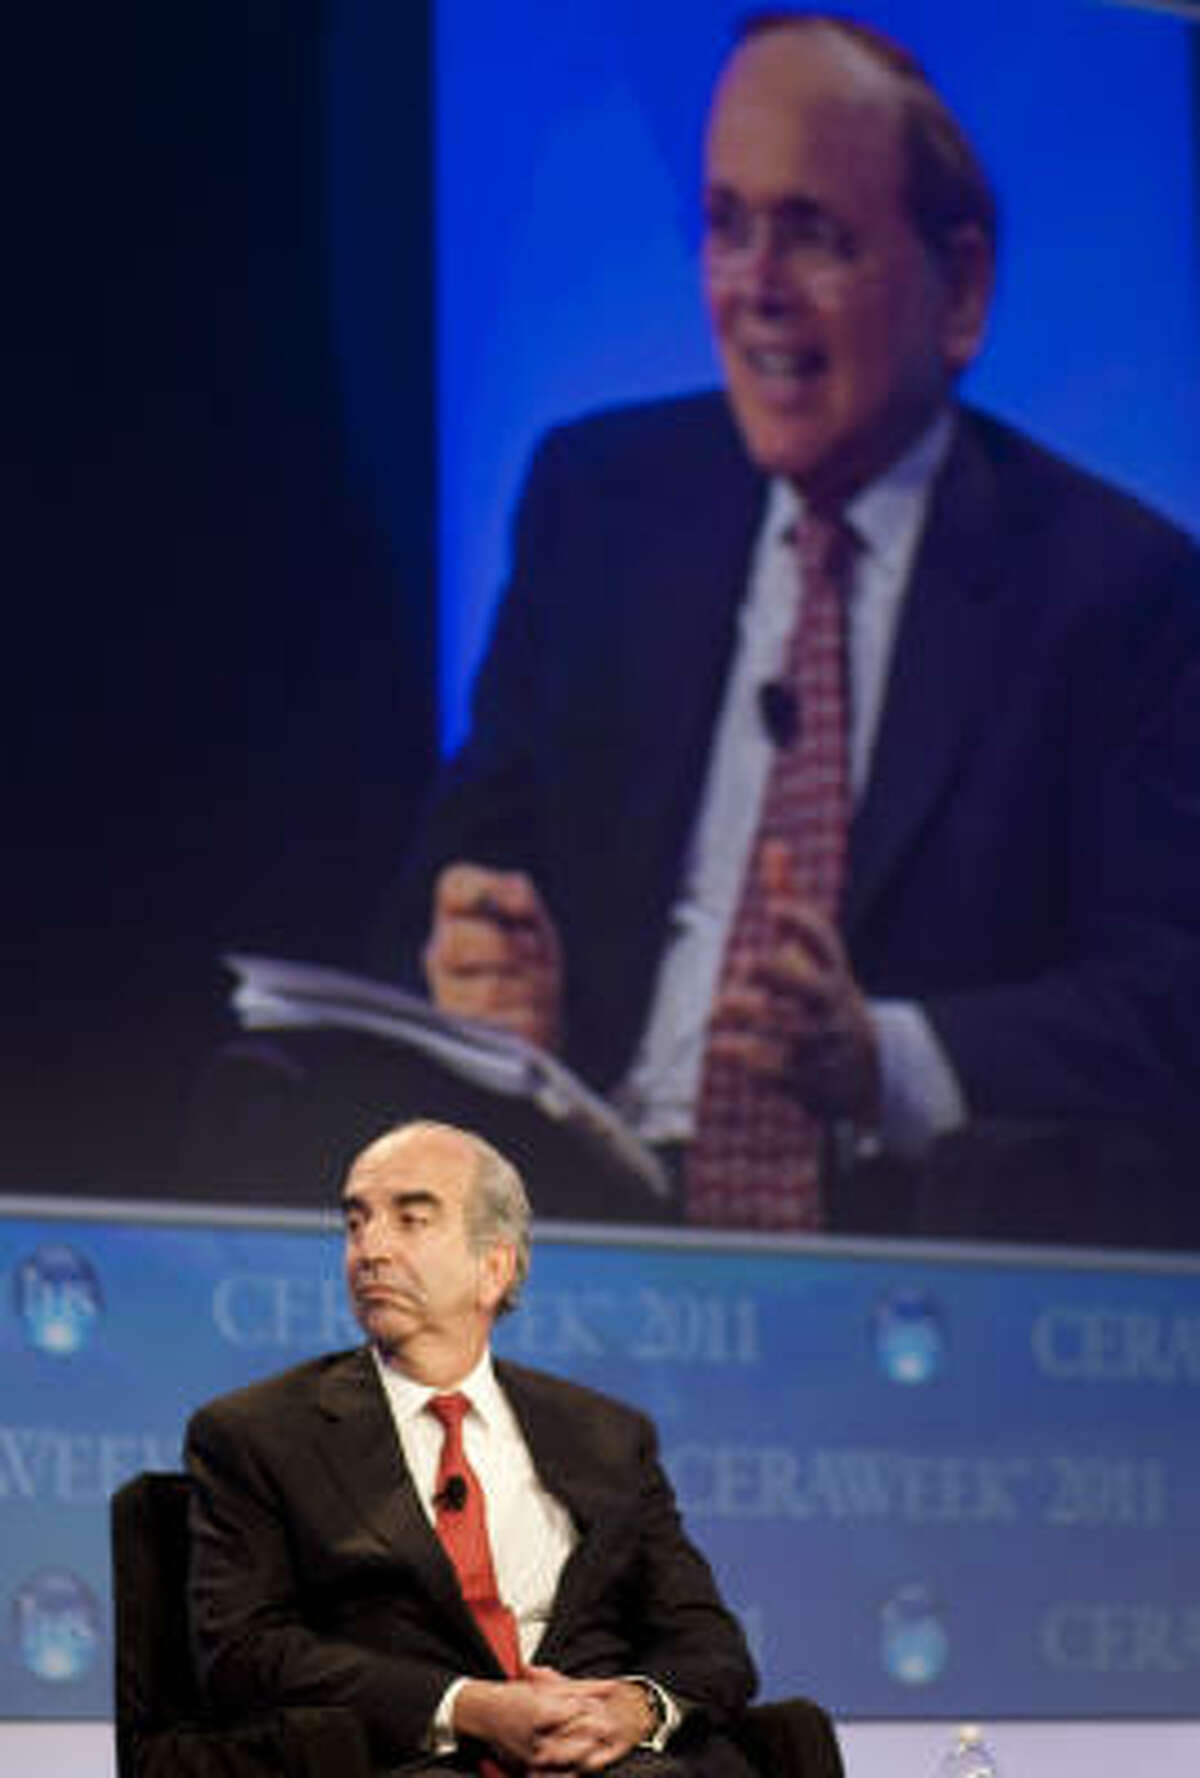 John Hess, chairman and CEO of Hess Corp., was among a group of speakers taking part in a discussion Tuesday at the opening of CERAWeek 2011.